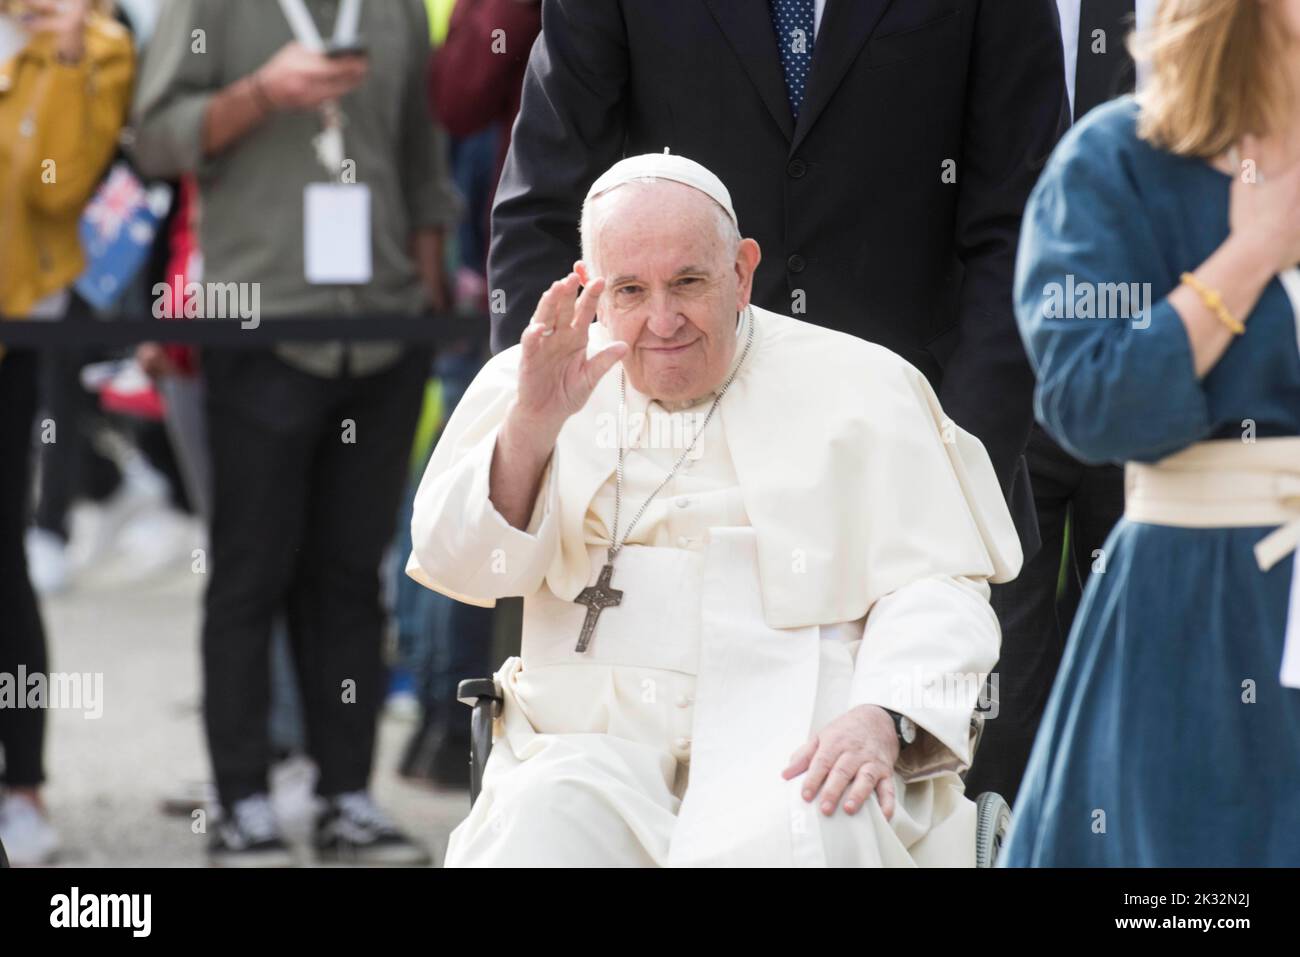 Assisi, Italy. 24th Sep, 2022. Italy, Assisi, Vatican, 22/09/24 Pope Francis meets with youth as he arrives to attend the Economy of Francesco (EoF) event on September 24, 2022 in Assisi, central Italy. EoF is a process called for by the Pope to lay foundations for a new economy.Photograph by Andrea Colarieti /Catholic Press Photo. RESTRICTED TO EDITORIAL USE - NO MARKETING - NO ADVERTISING CAMPAIGNS Credit: Independent Photo Agency/Alamy Live News Stock Photo